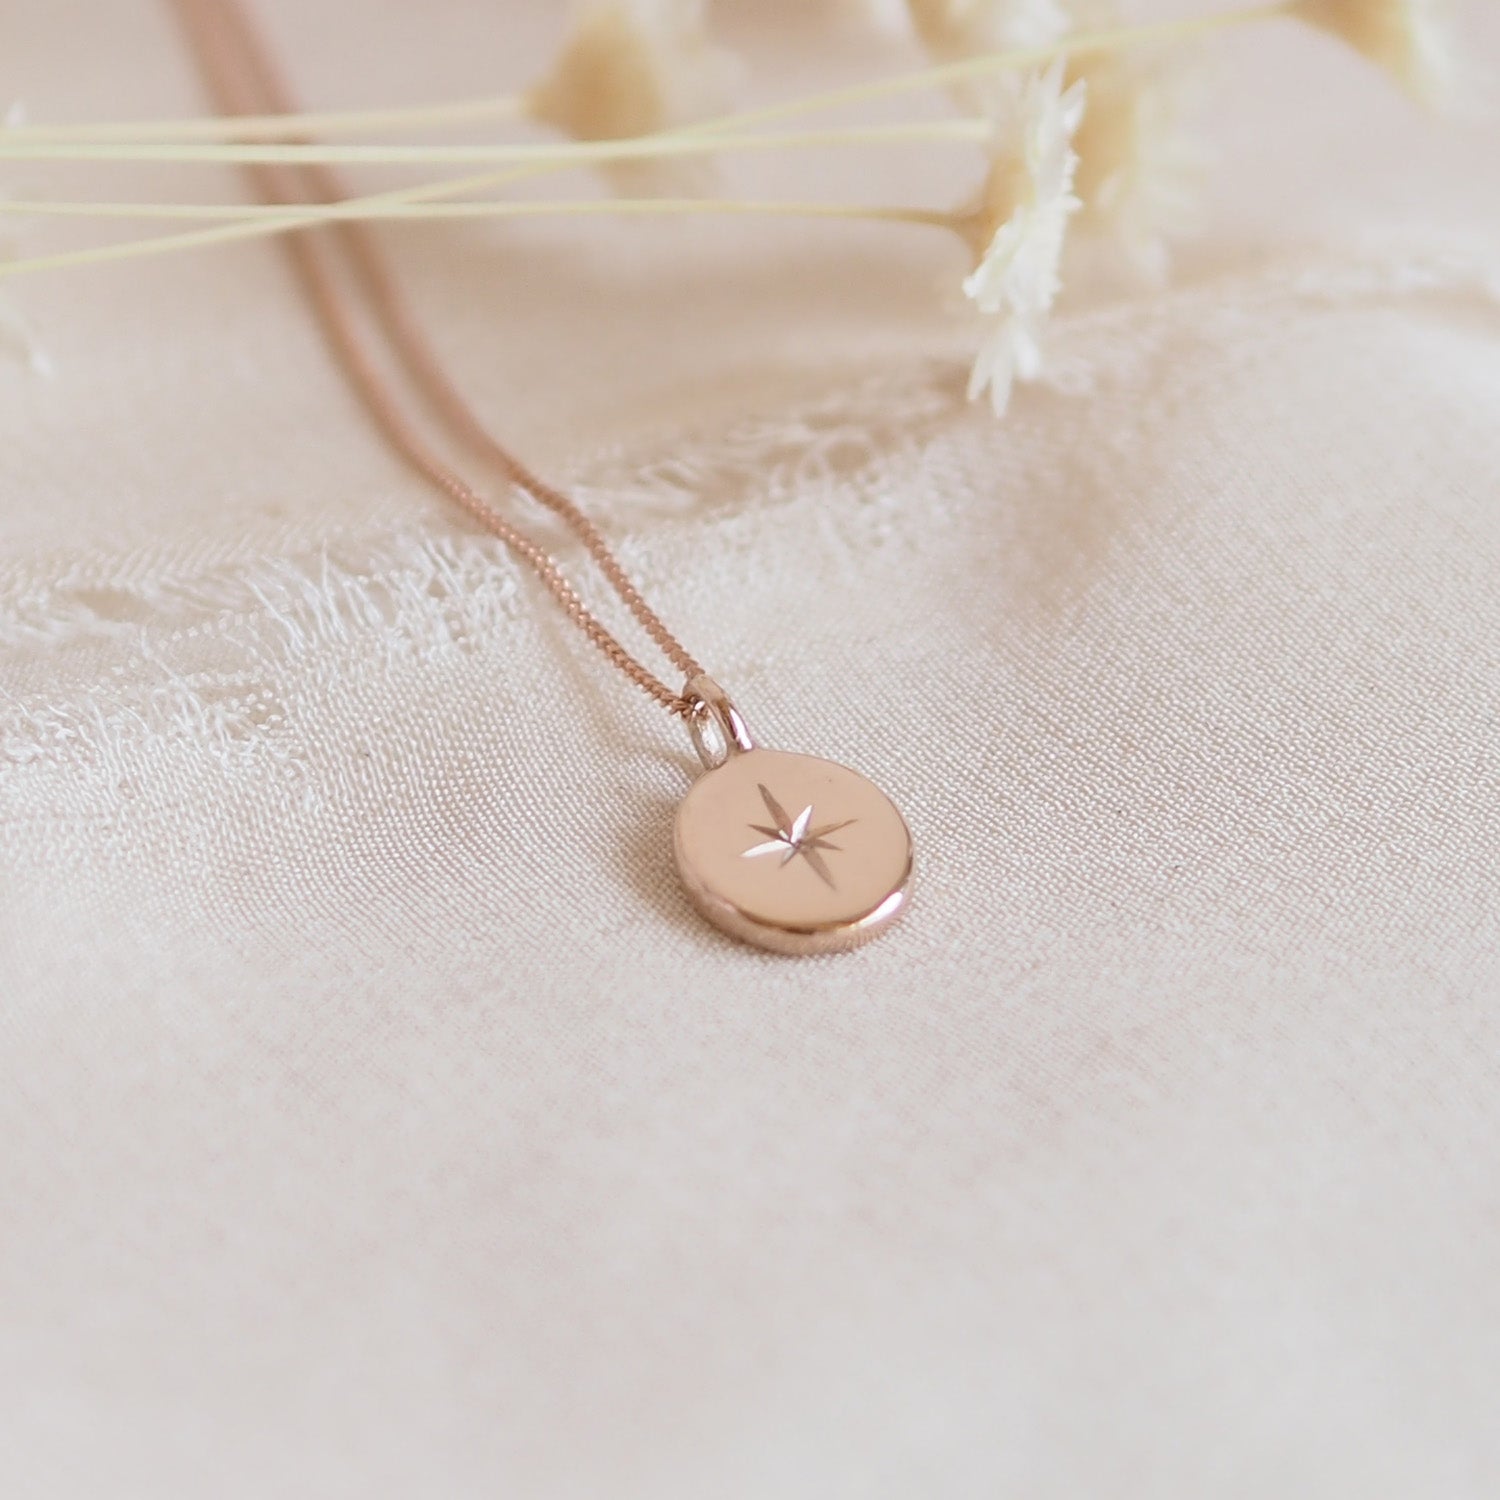 Small Oval Star Necklace in Solid 9ct Gold